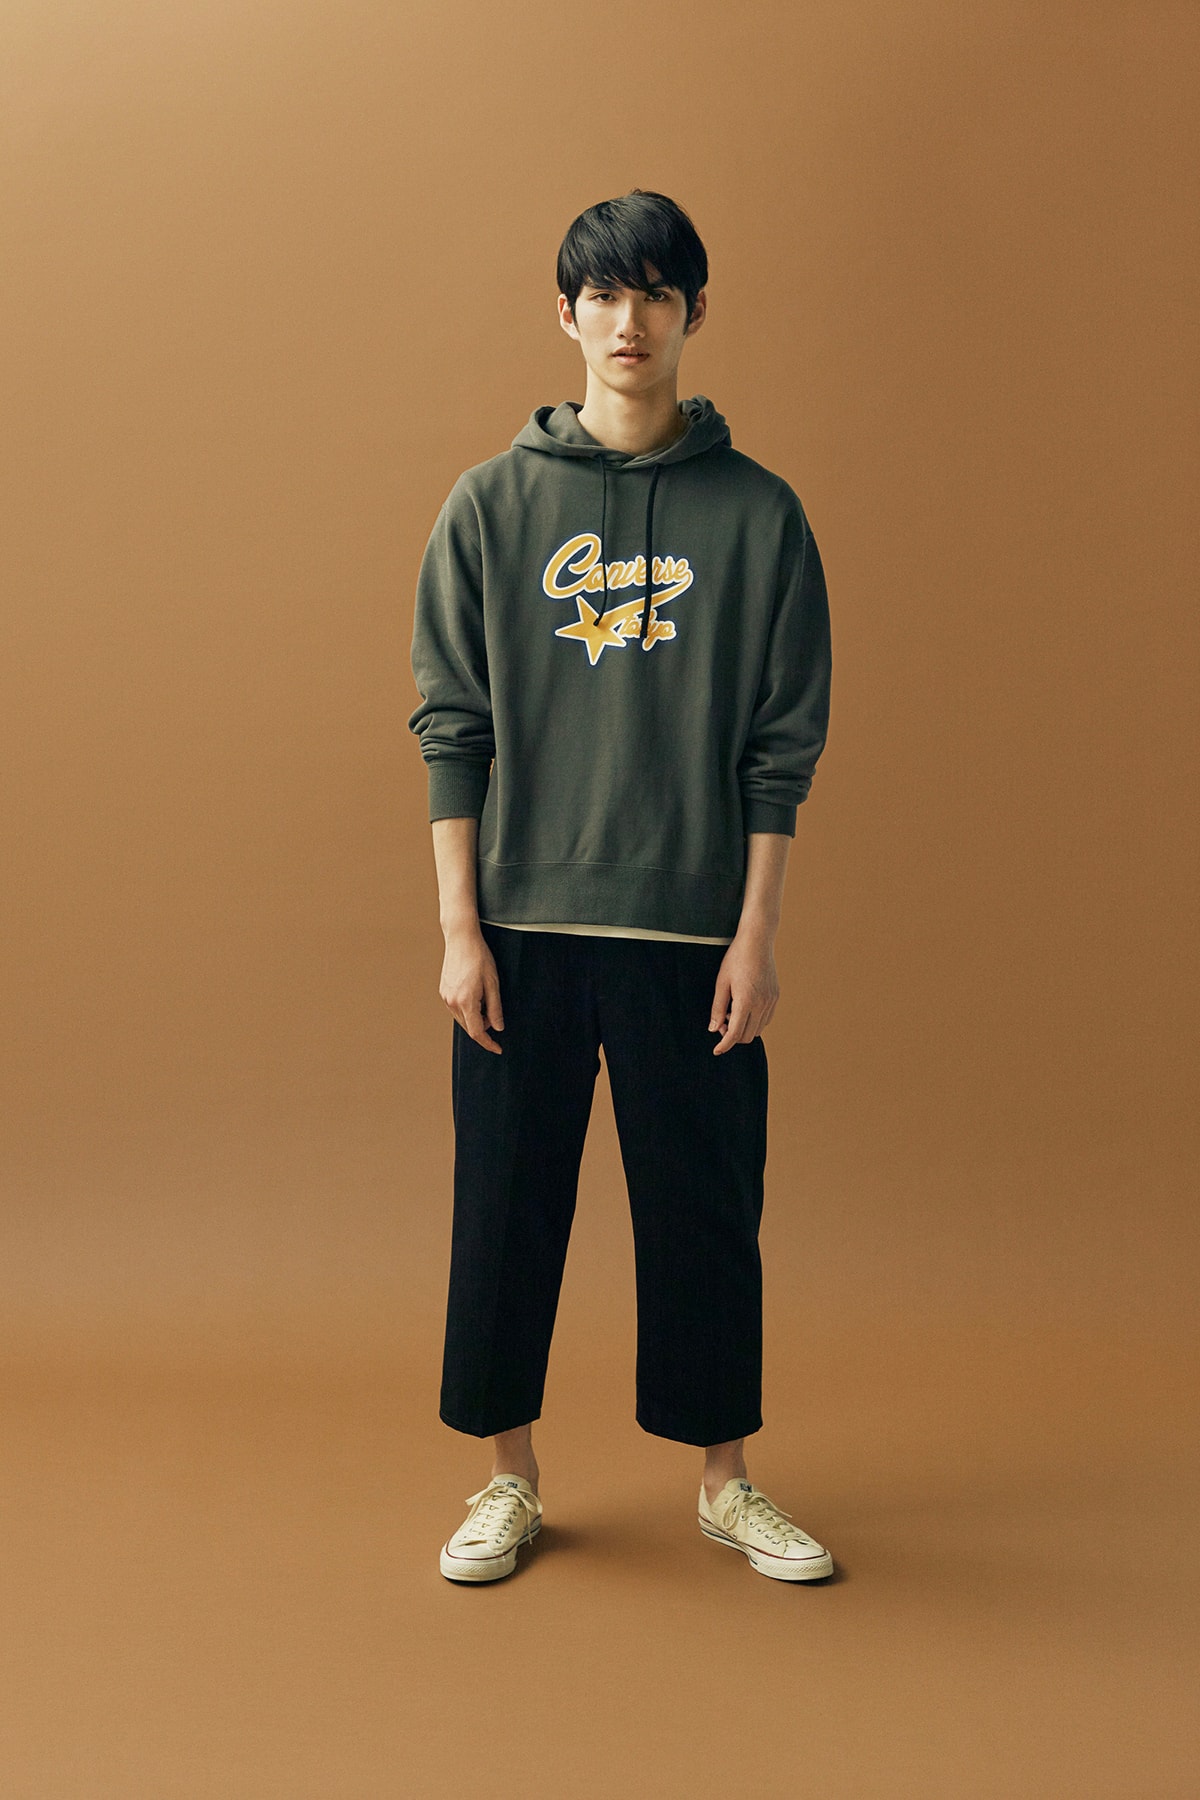 Converse Tokyo lookbook fall winter 2018 collection japan exclusive